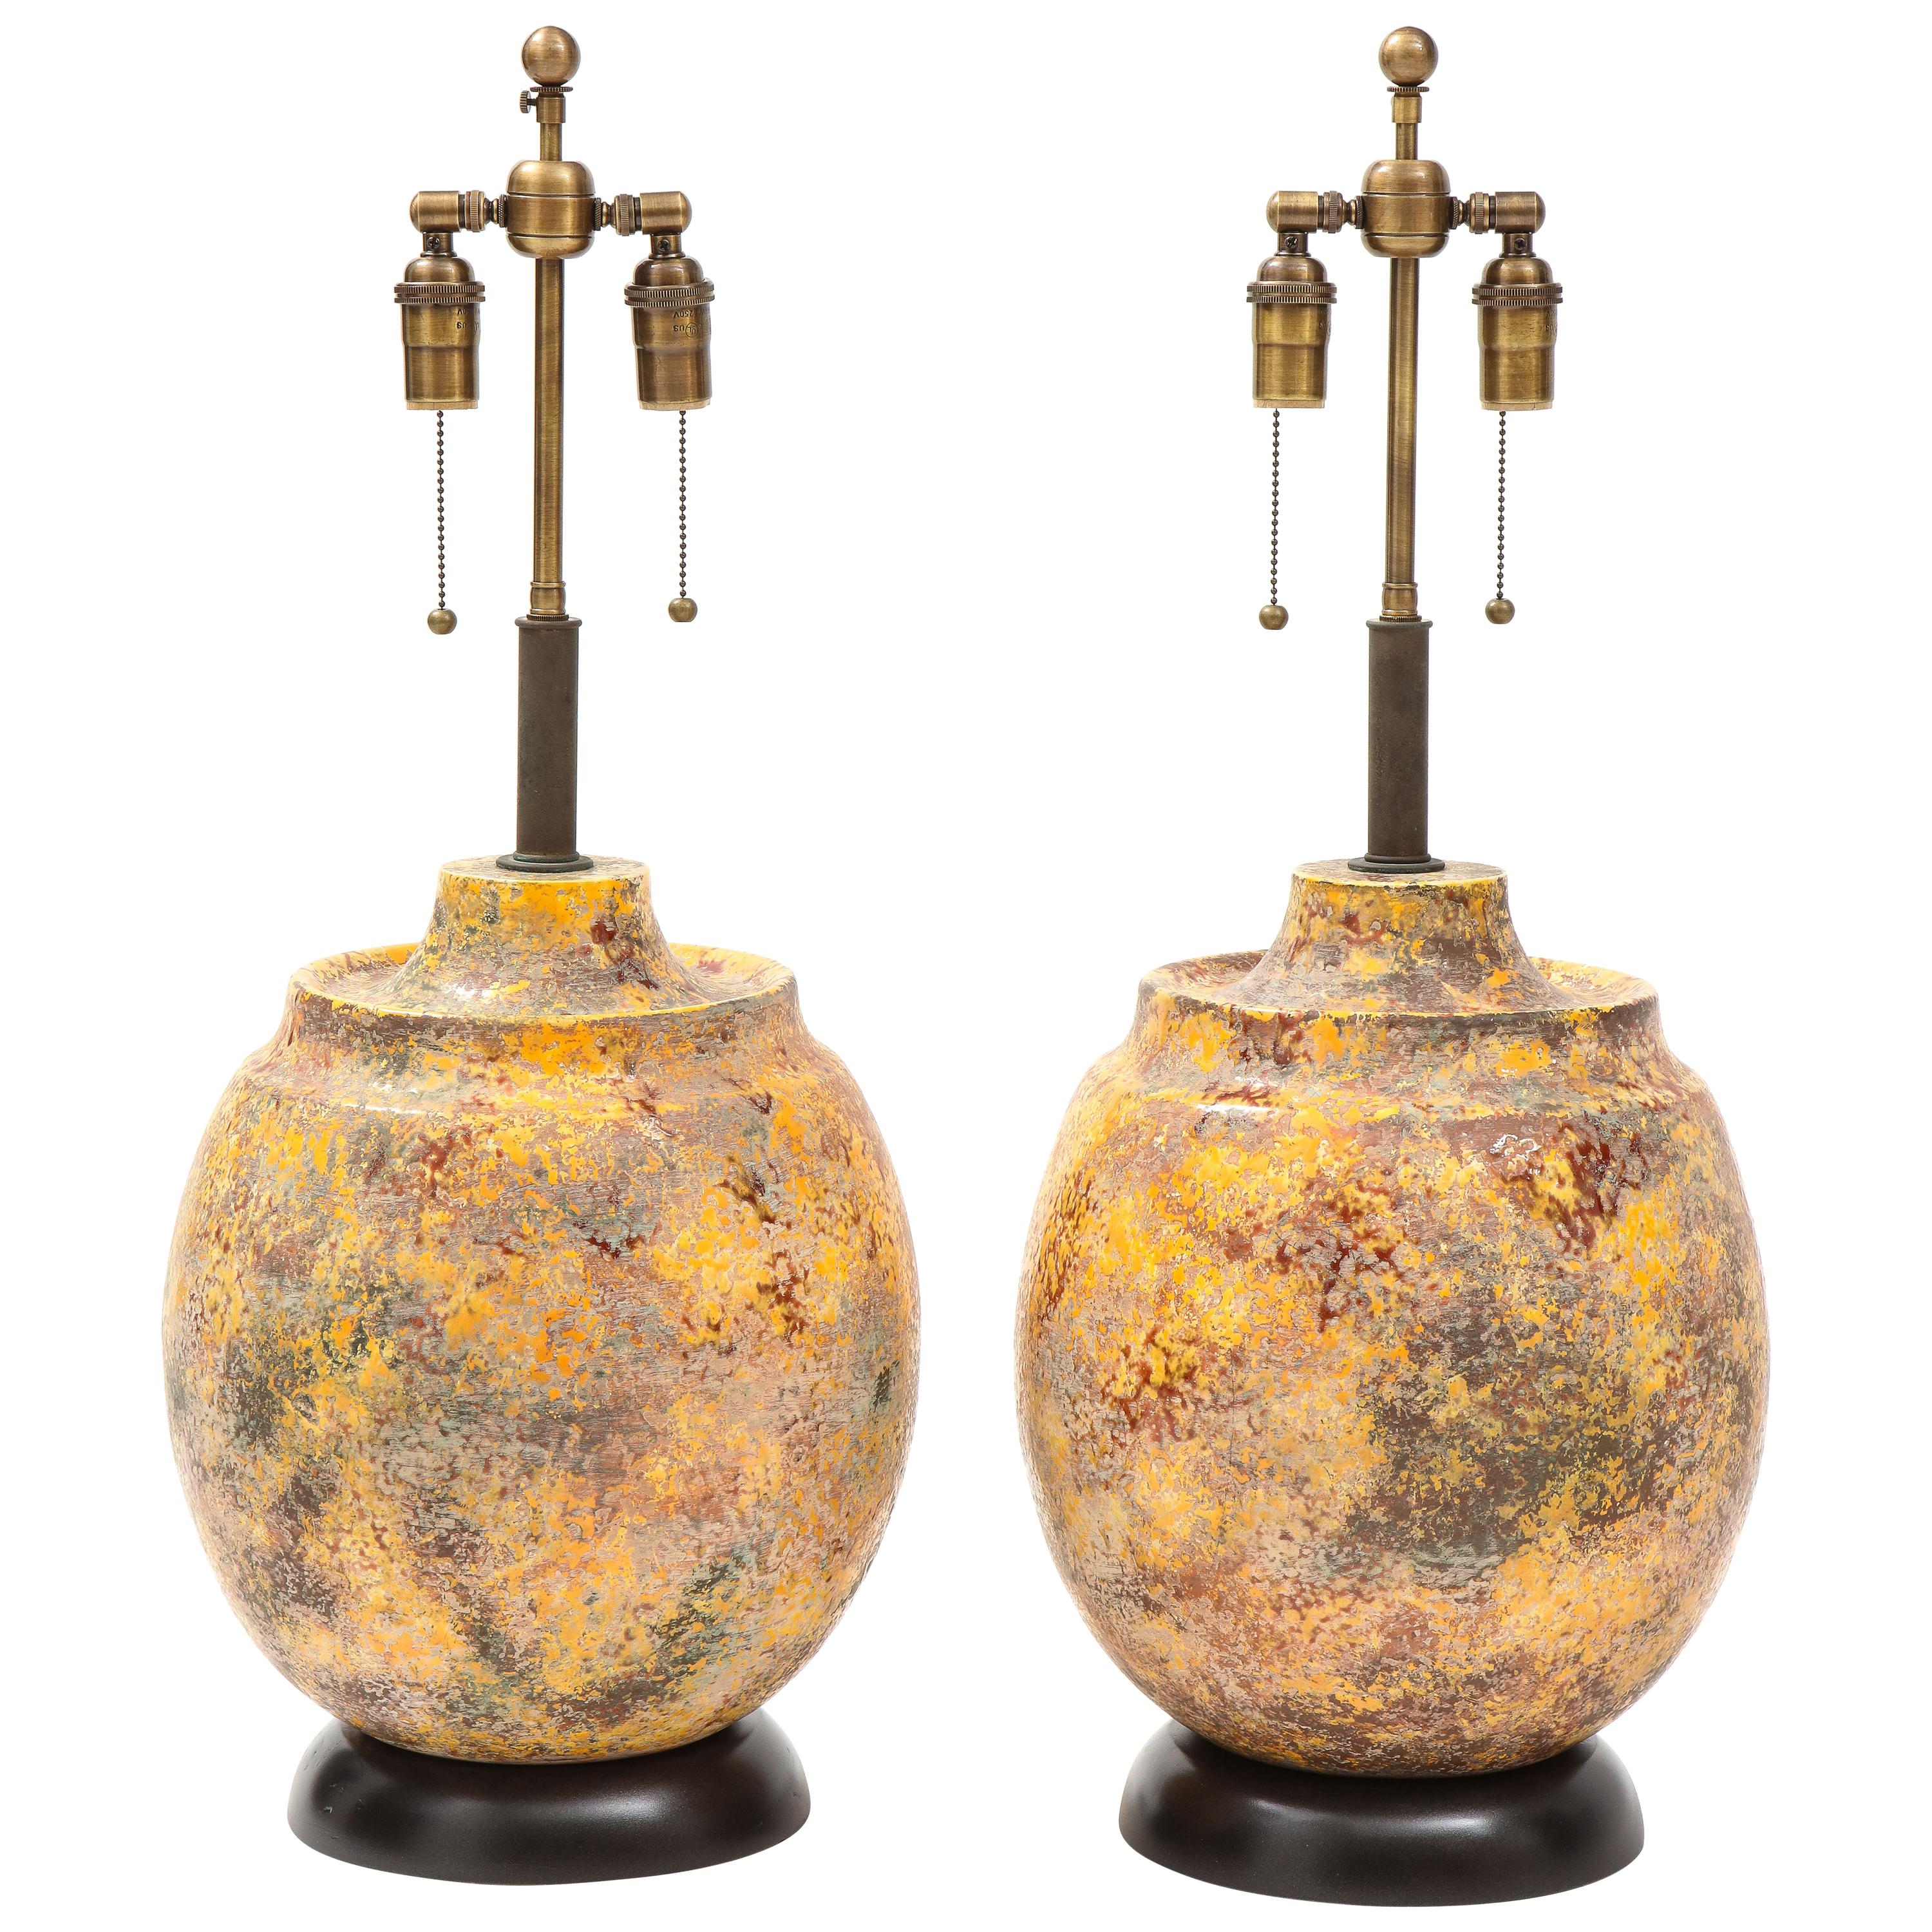 Pair of Large Italian Ceramic Lamps with a "Scavo" Glazed Finish For Sale